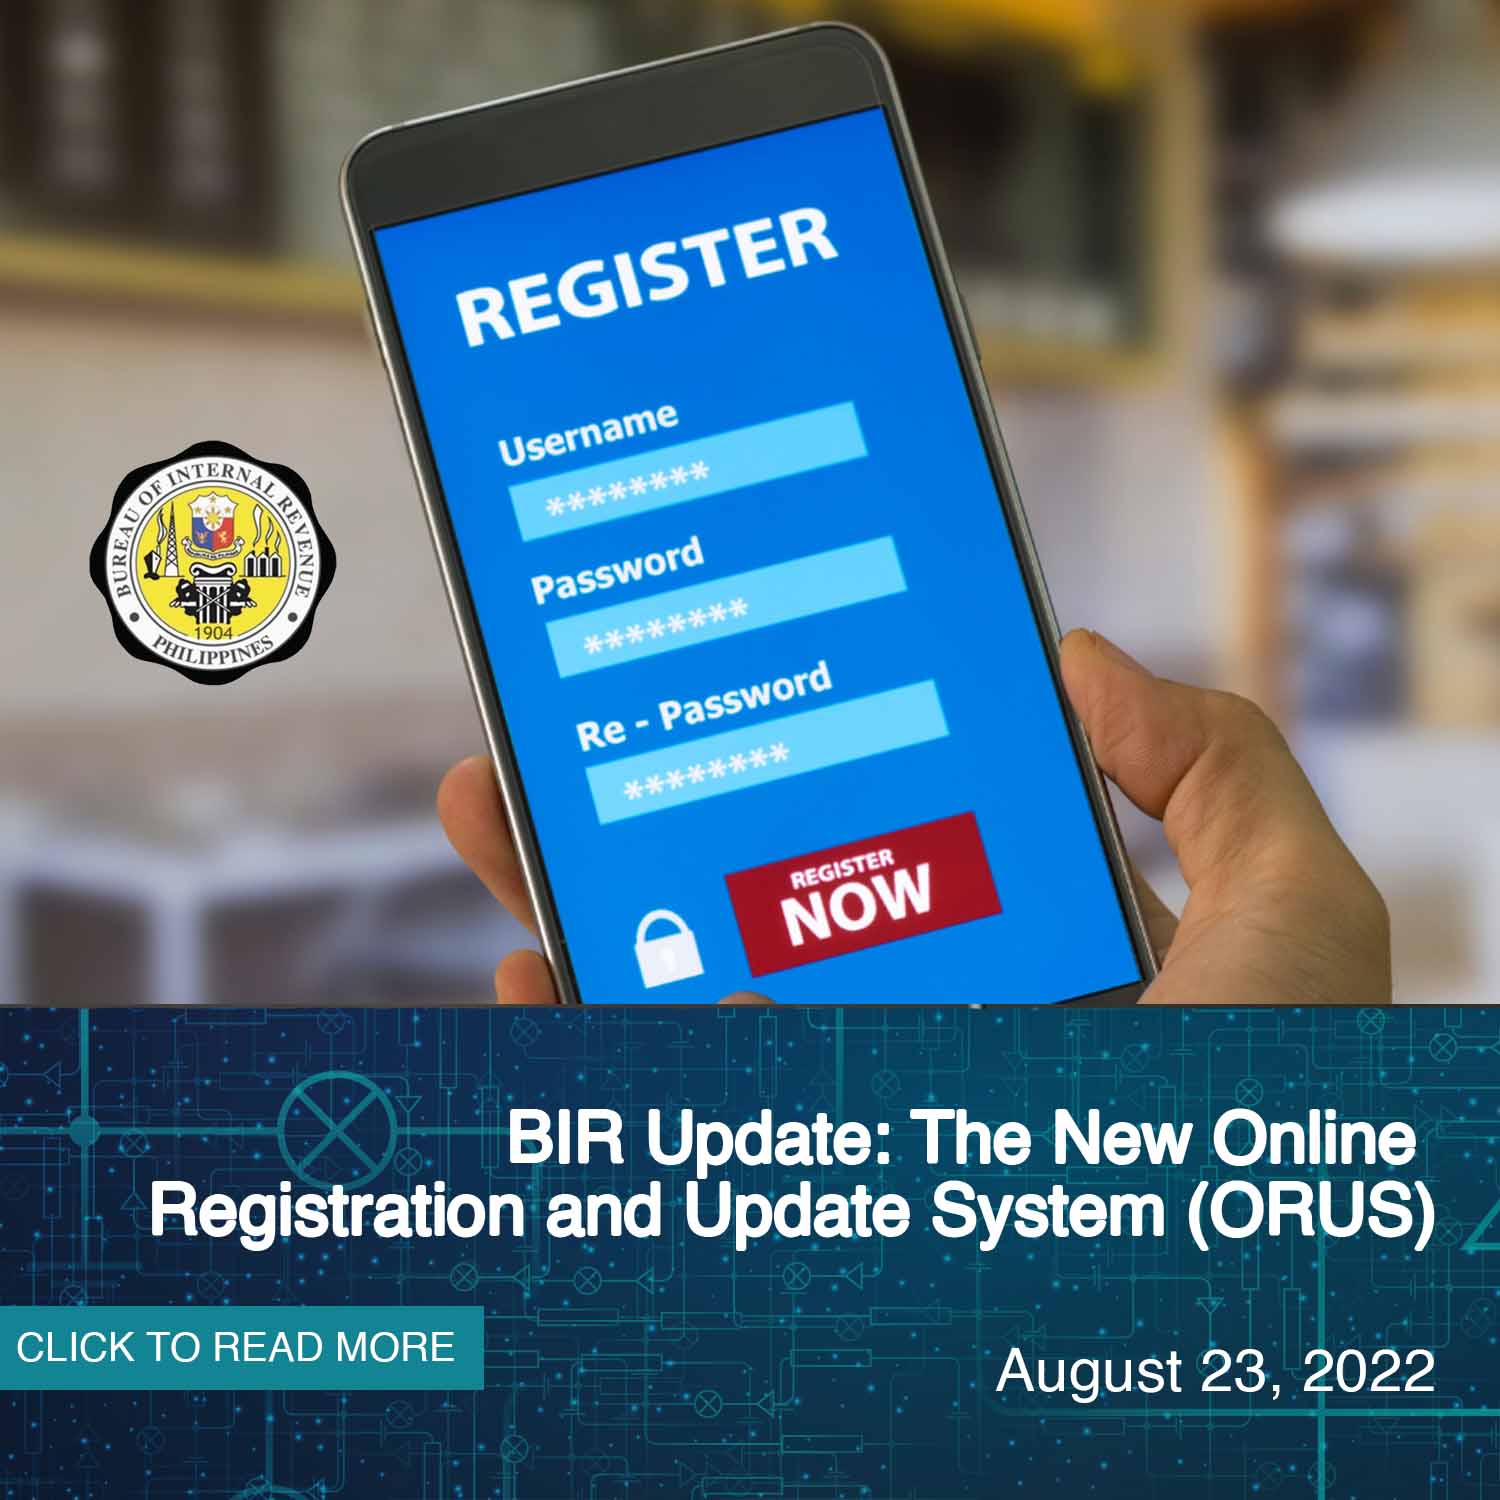 BIR Update: The New Online Registration and Update System (ORUS)